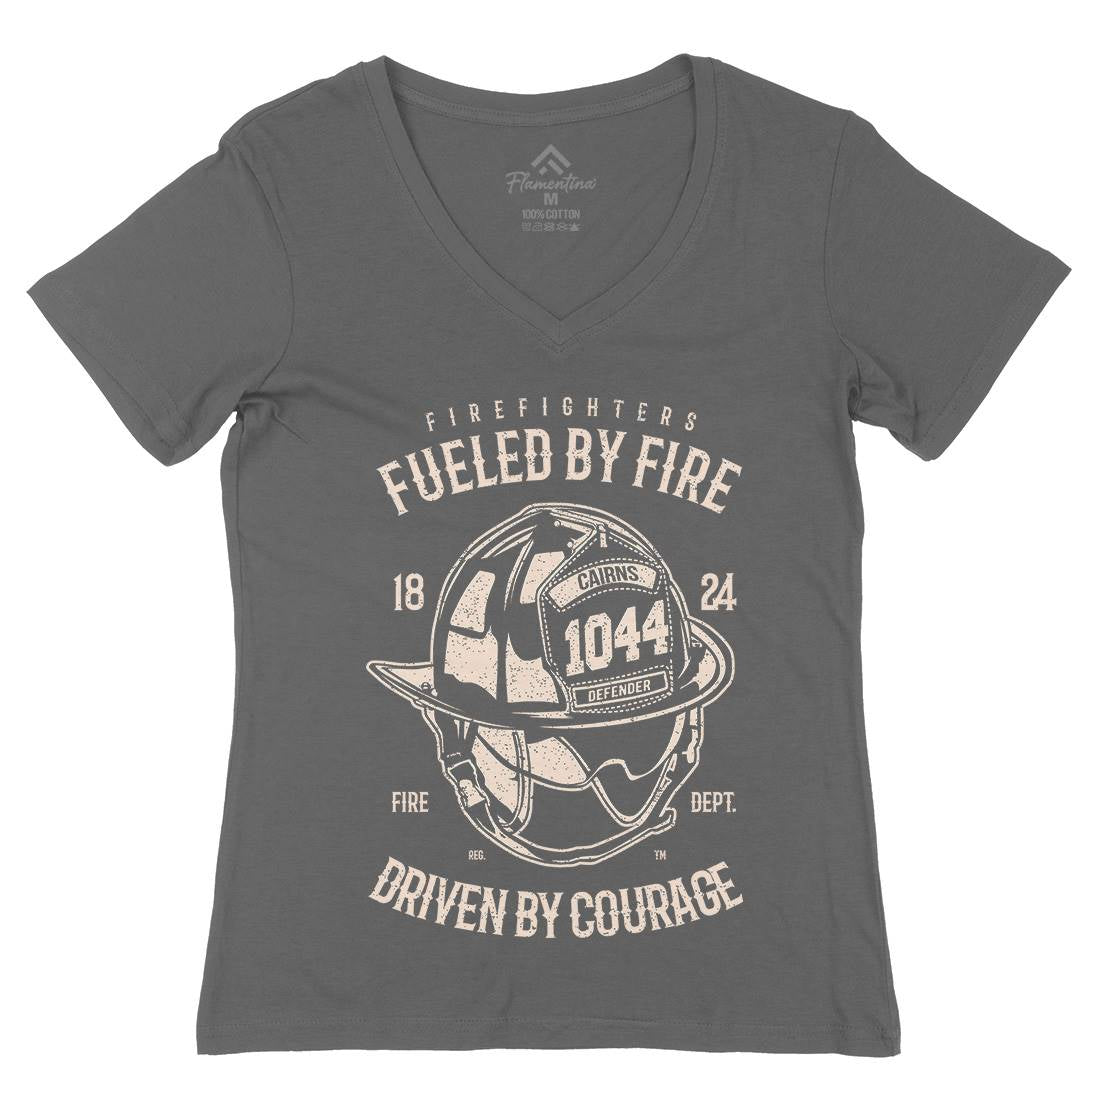 Fuelled By Fire Womens Organic V-Neck T-Shirt Firefighters A667